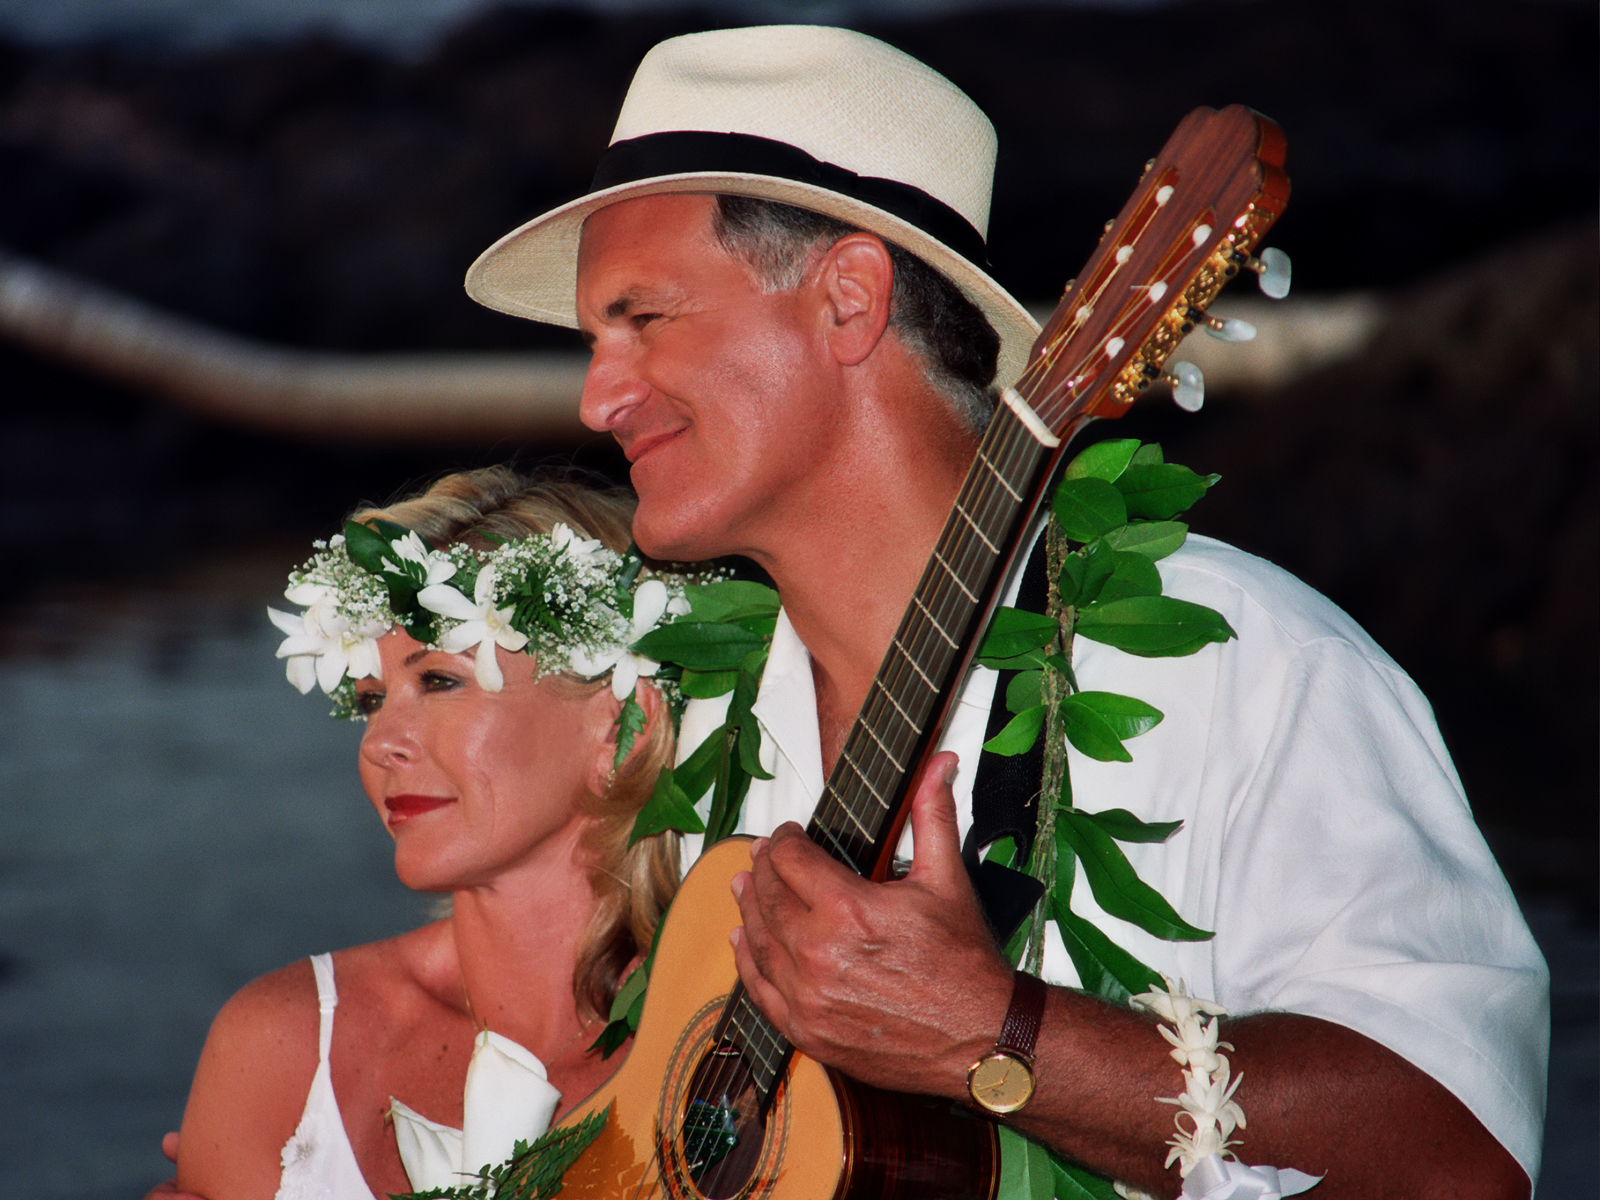 Jeff and Lisa Linsky to Perform on Water Island 